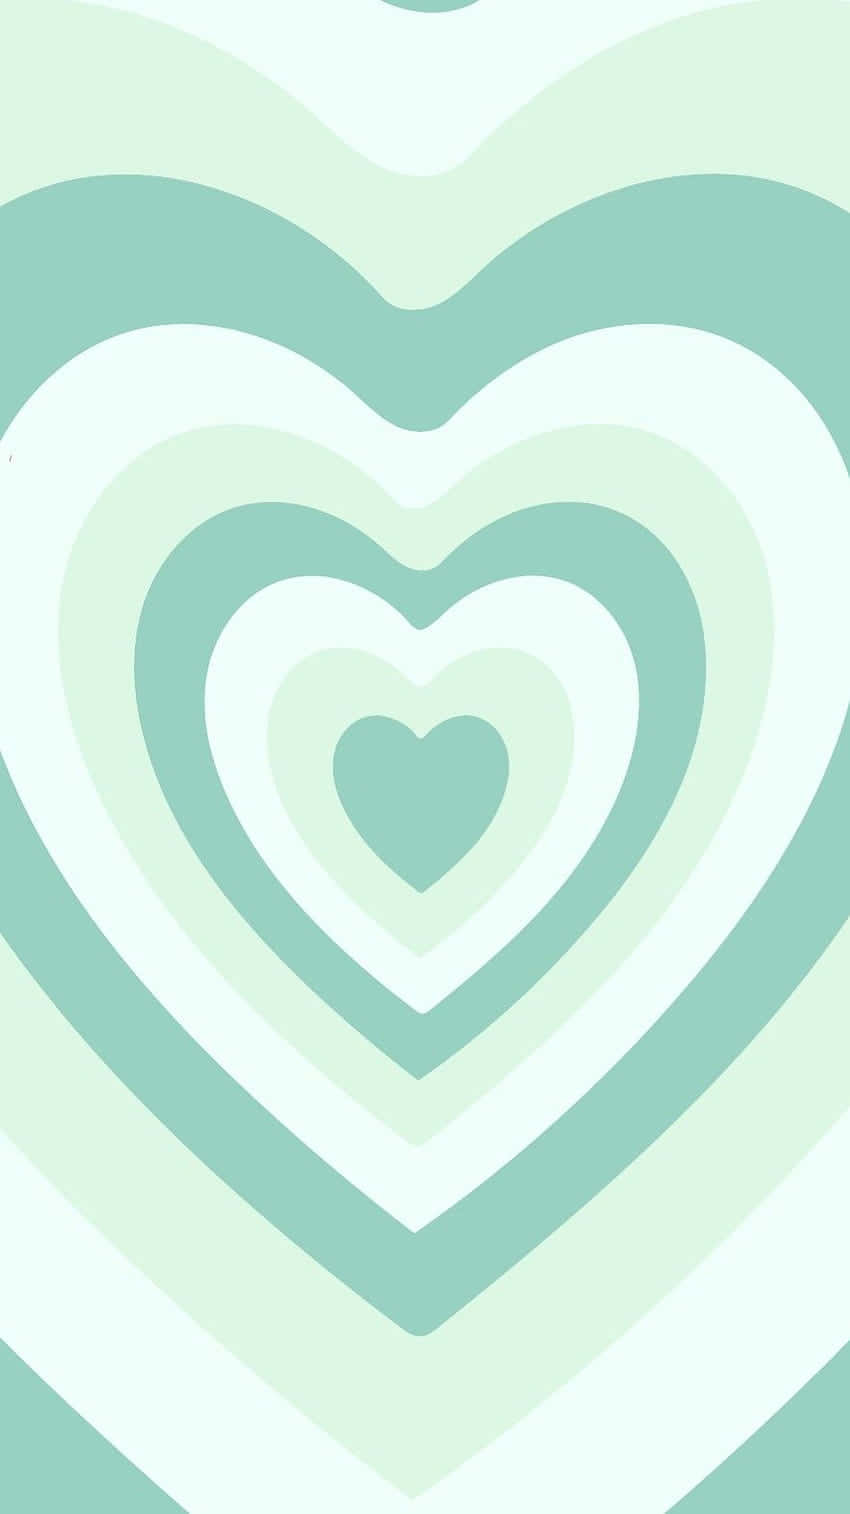 Love Green - A pair of bright Mint Green Hearts symbolizing love, strength and friendship. Wallpaper